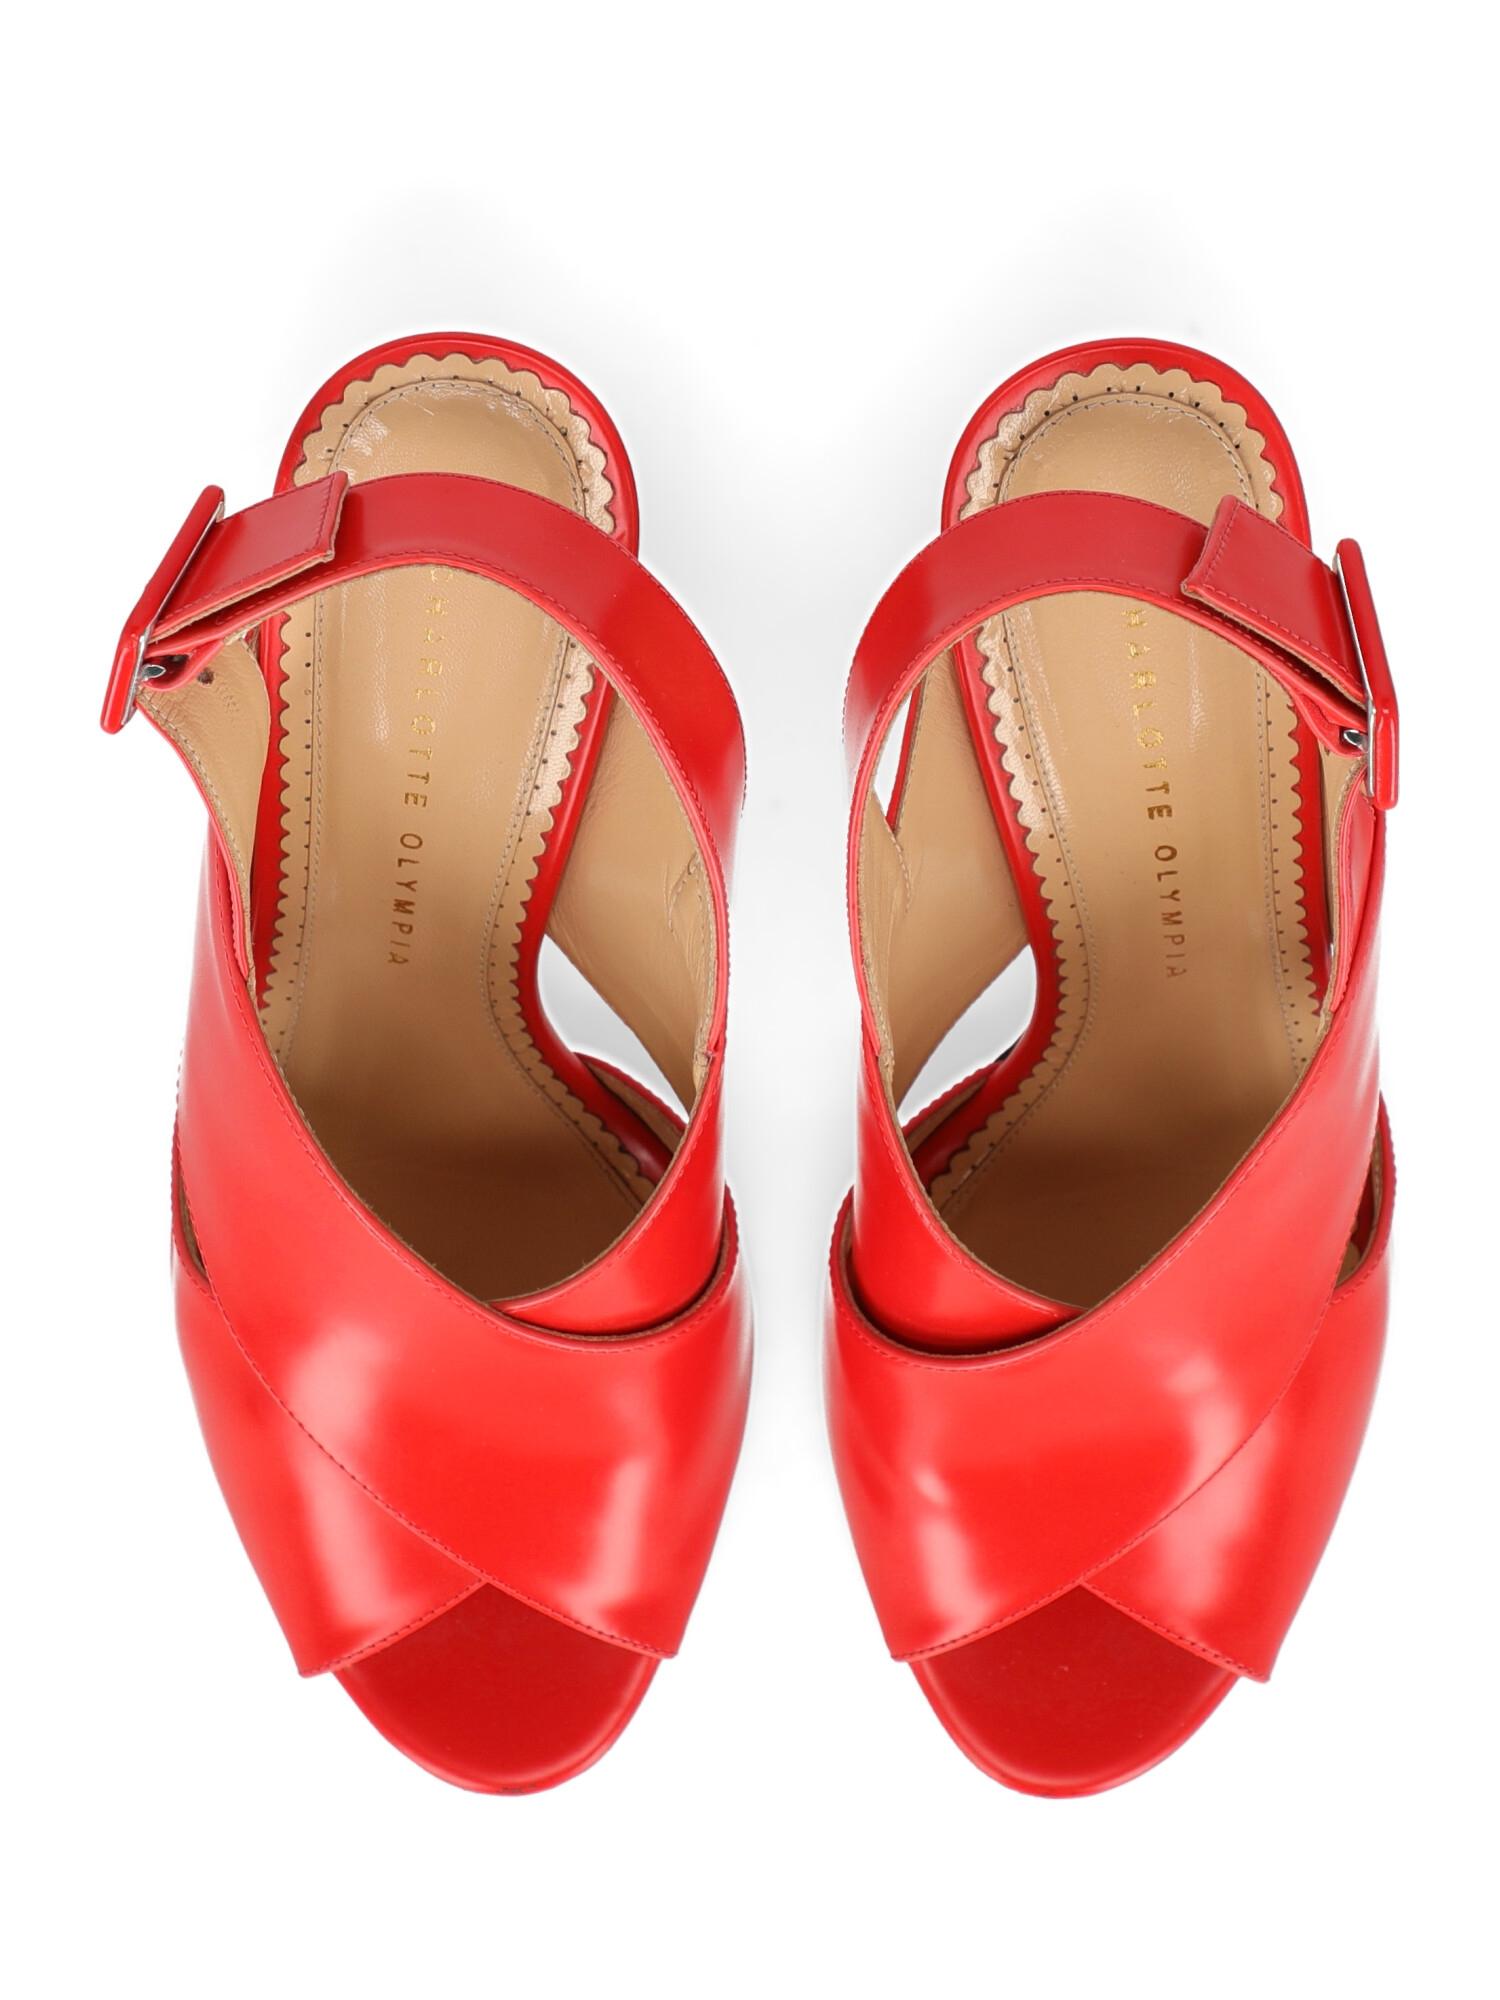 Charlotte Olympia Woman Sandals Red Leather IT 40 For Sale 2